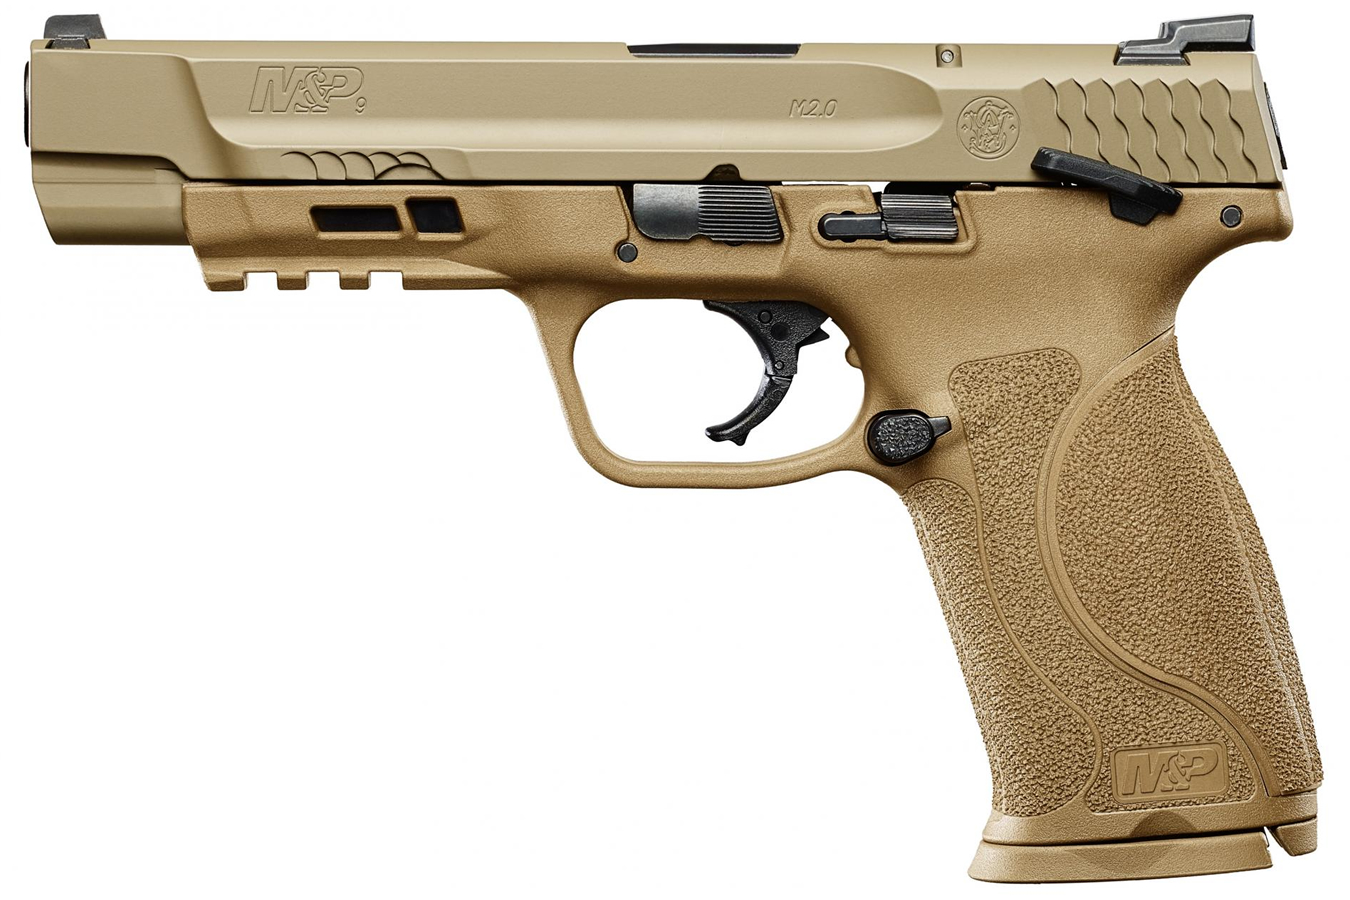 SMITH AND WESSON MP9 M2.0 9MM FDE PISTOL (LE)